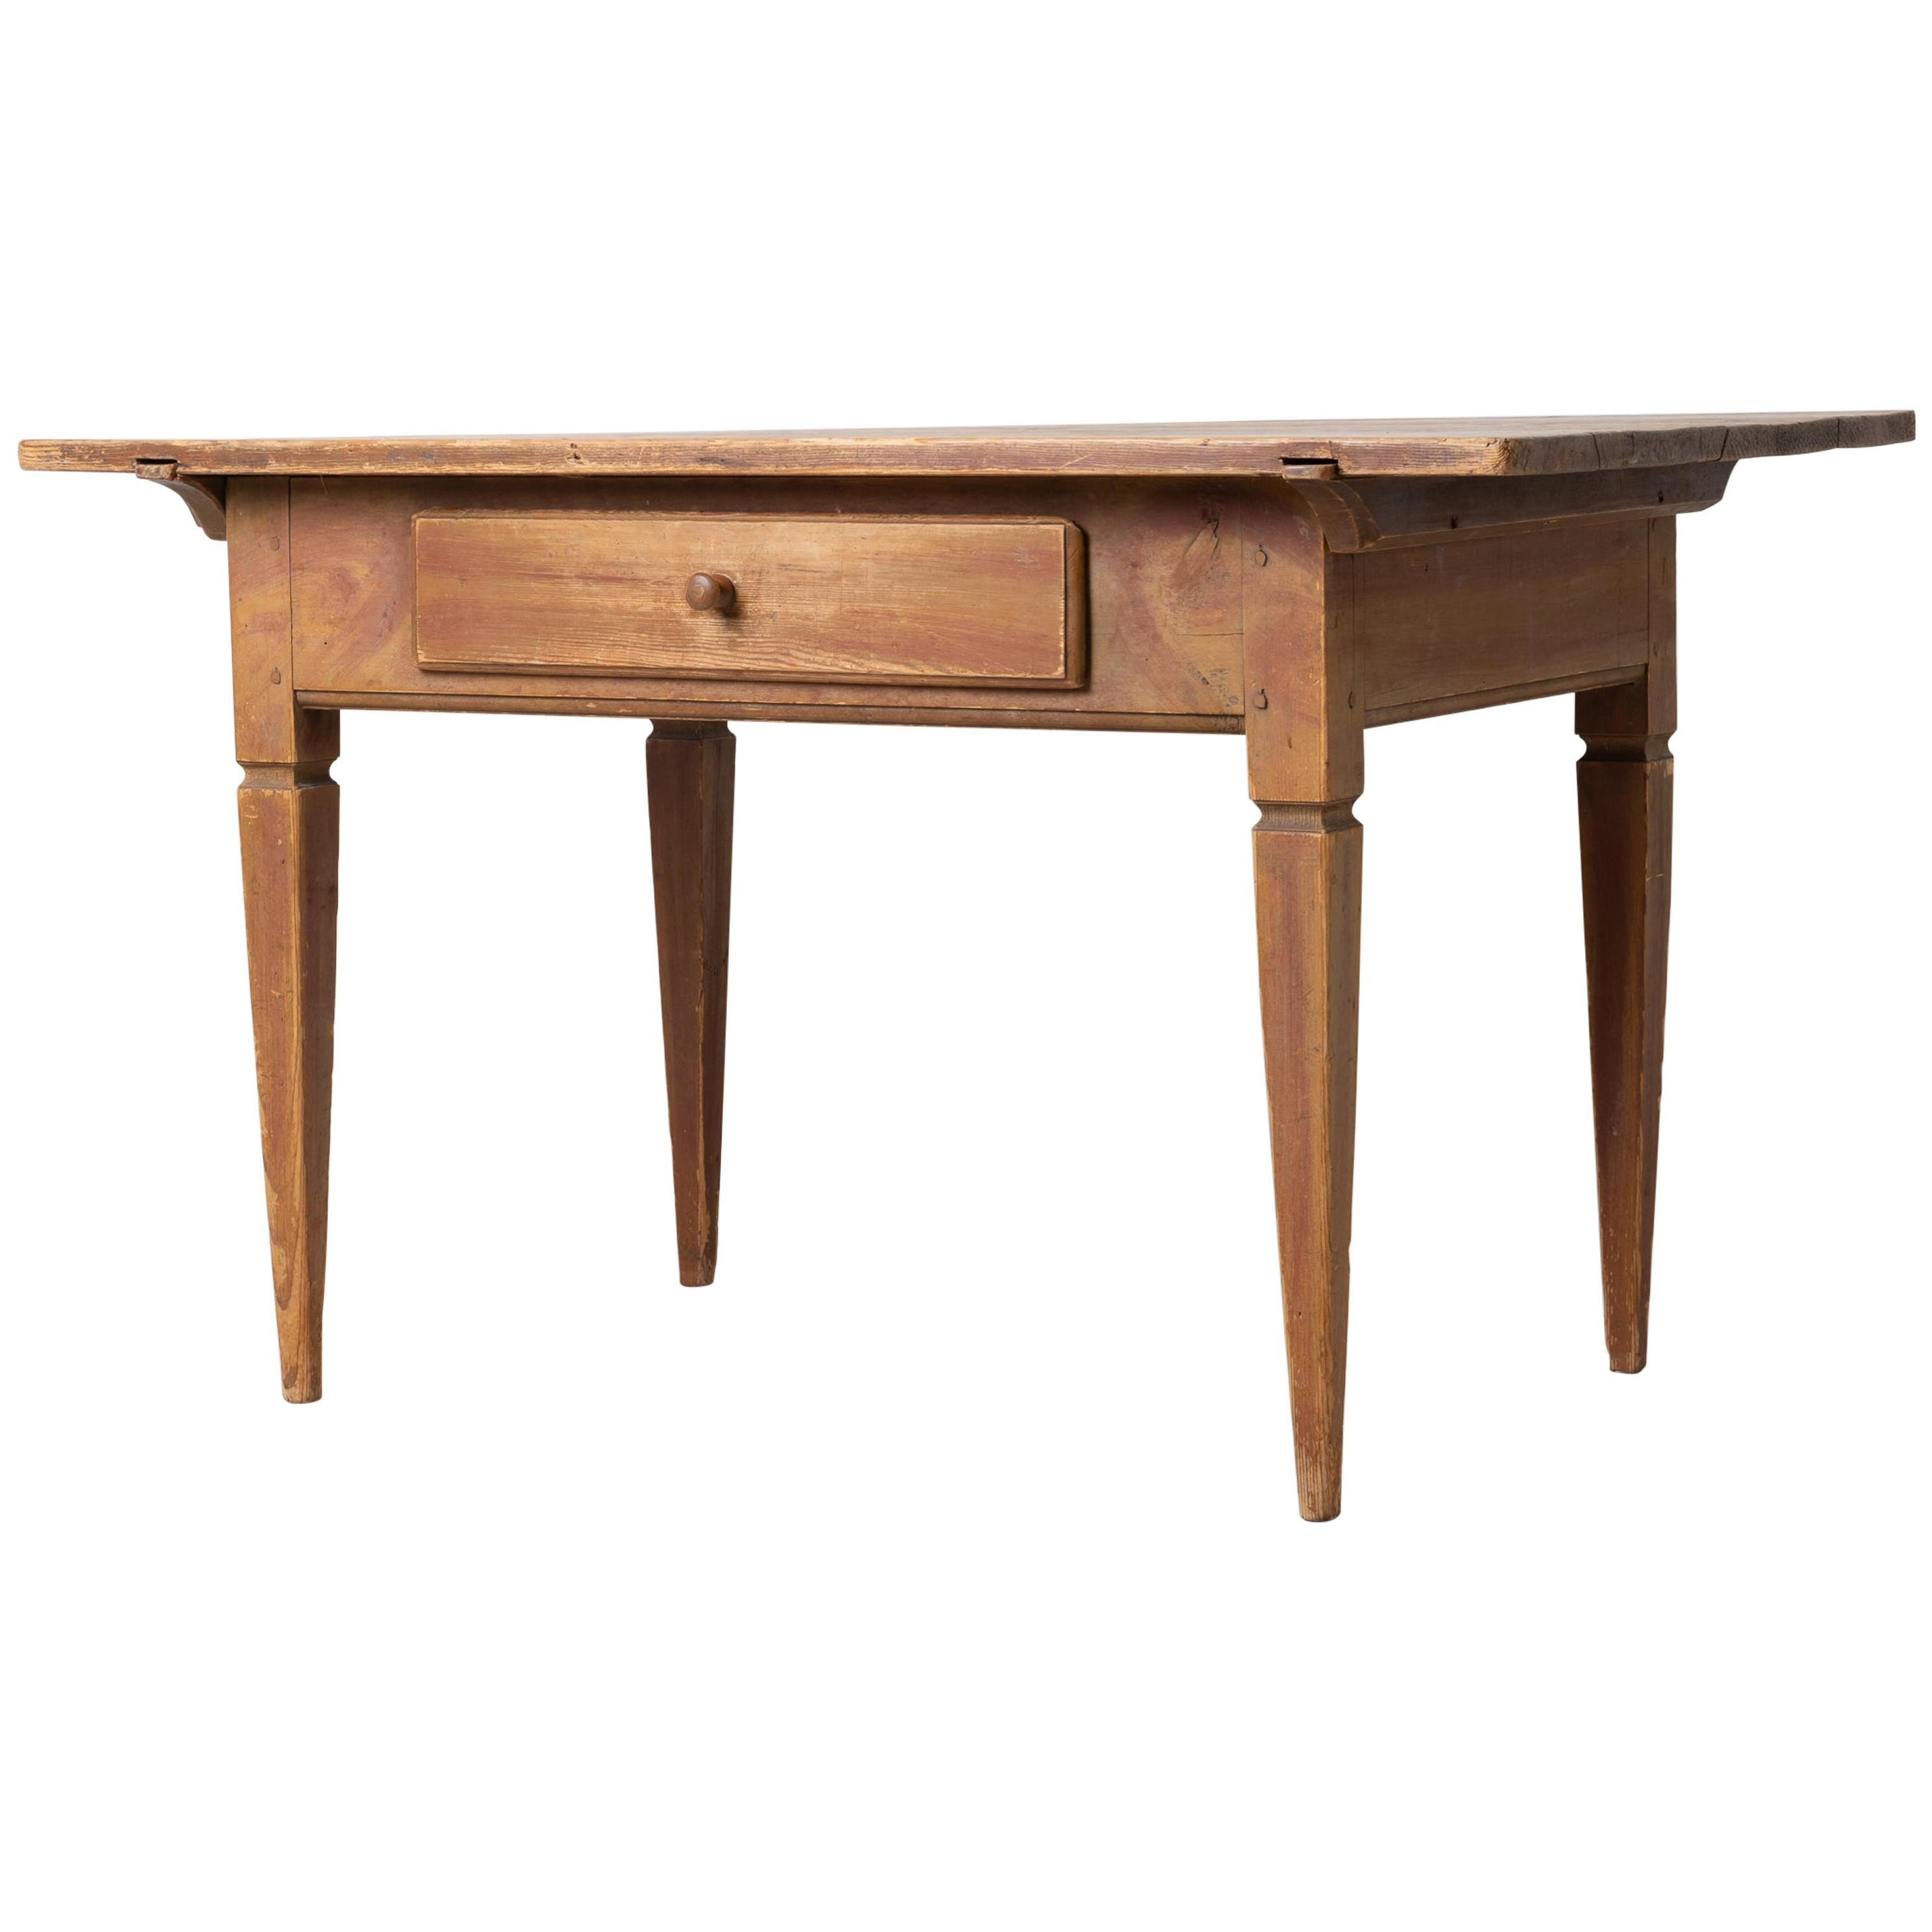 18th Century Swedish Gustavian Country Furniture Table